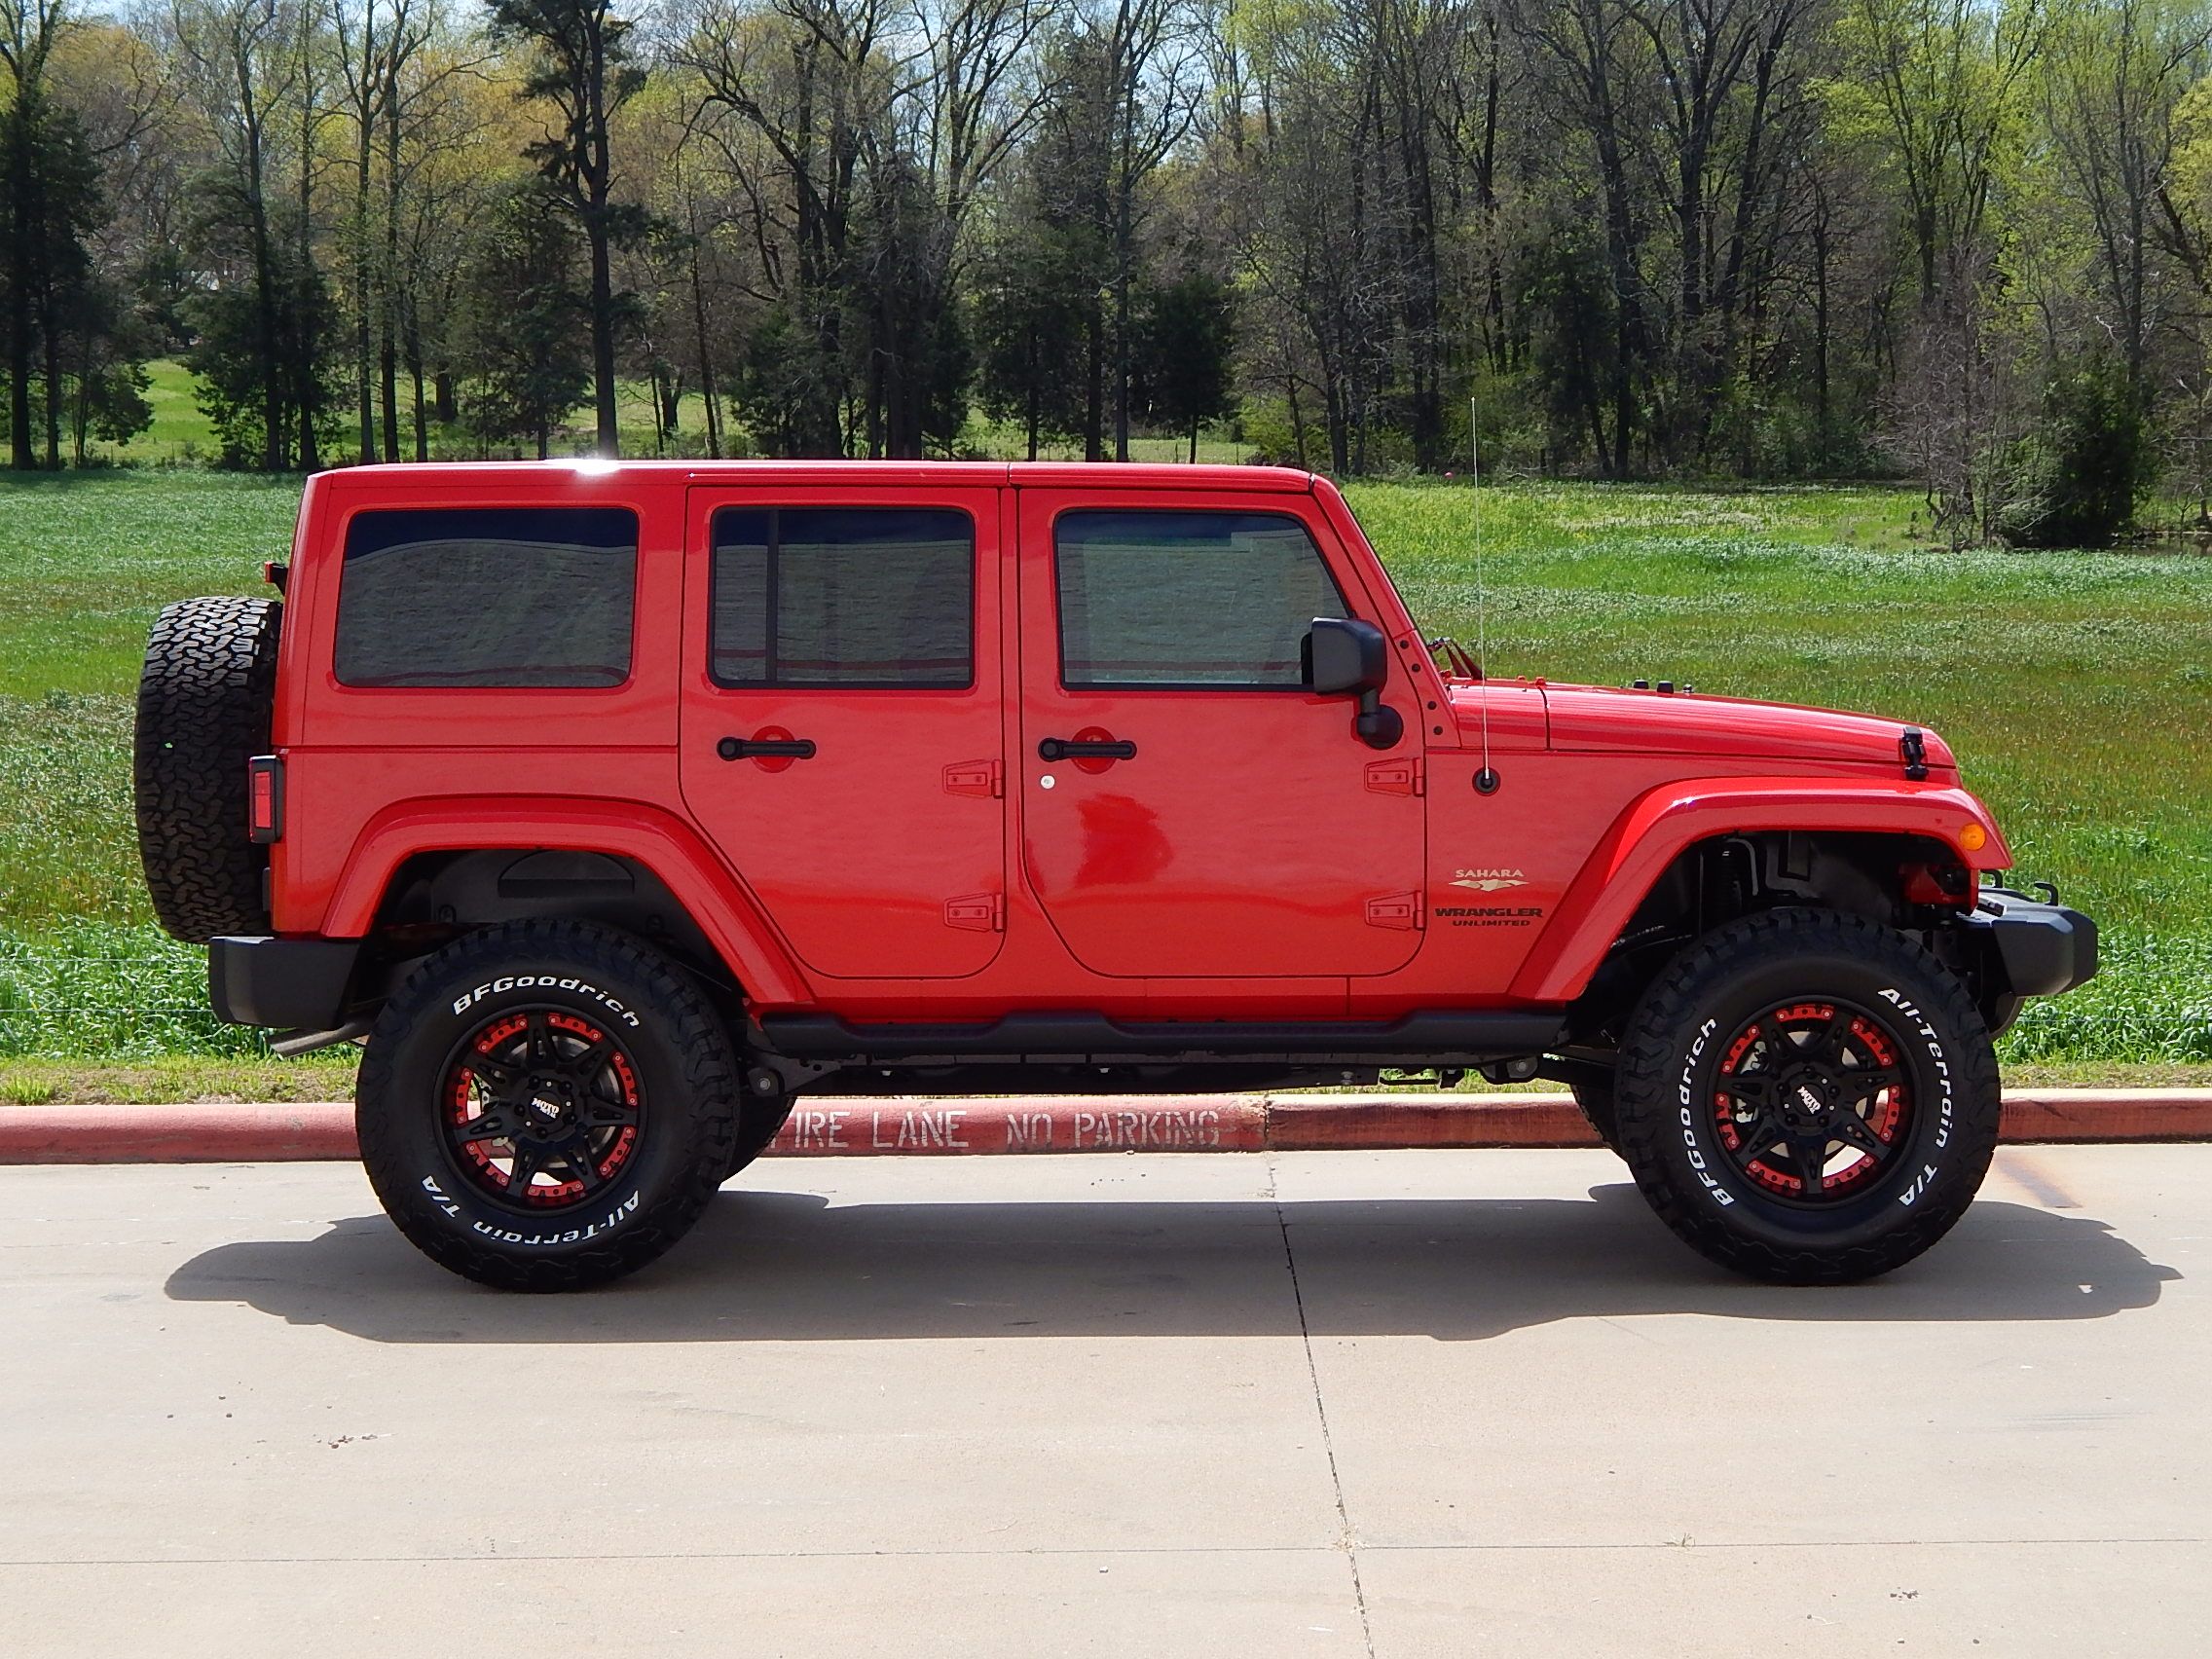 2015 Jeep Wrangler Unlimited Sahara in Firecracker Red! Check out ...